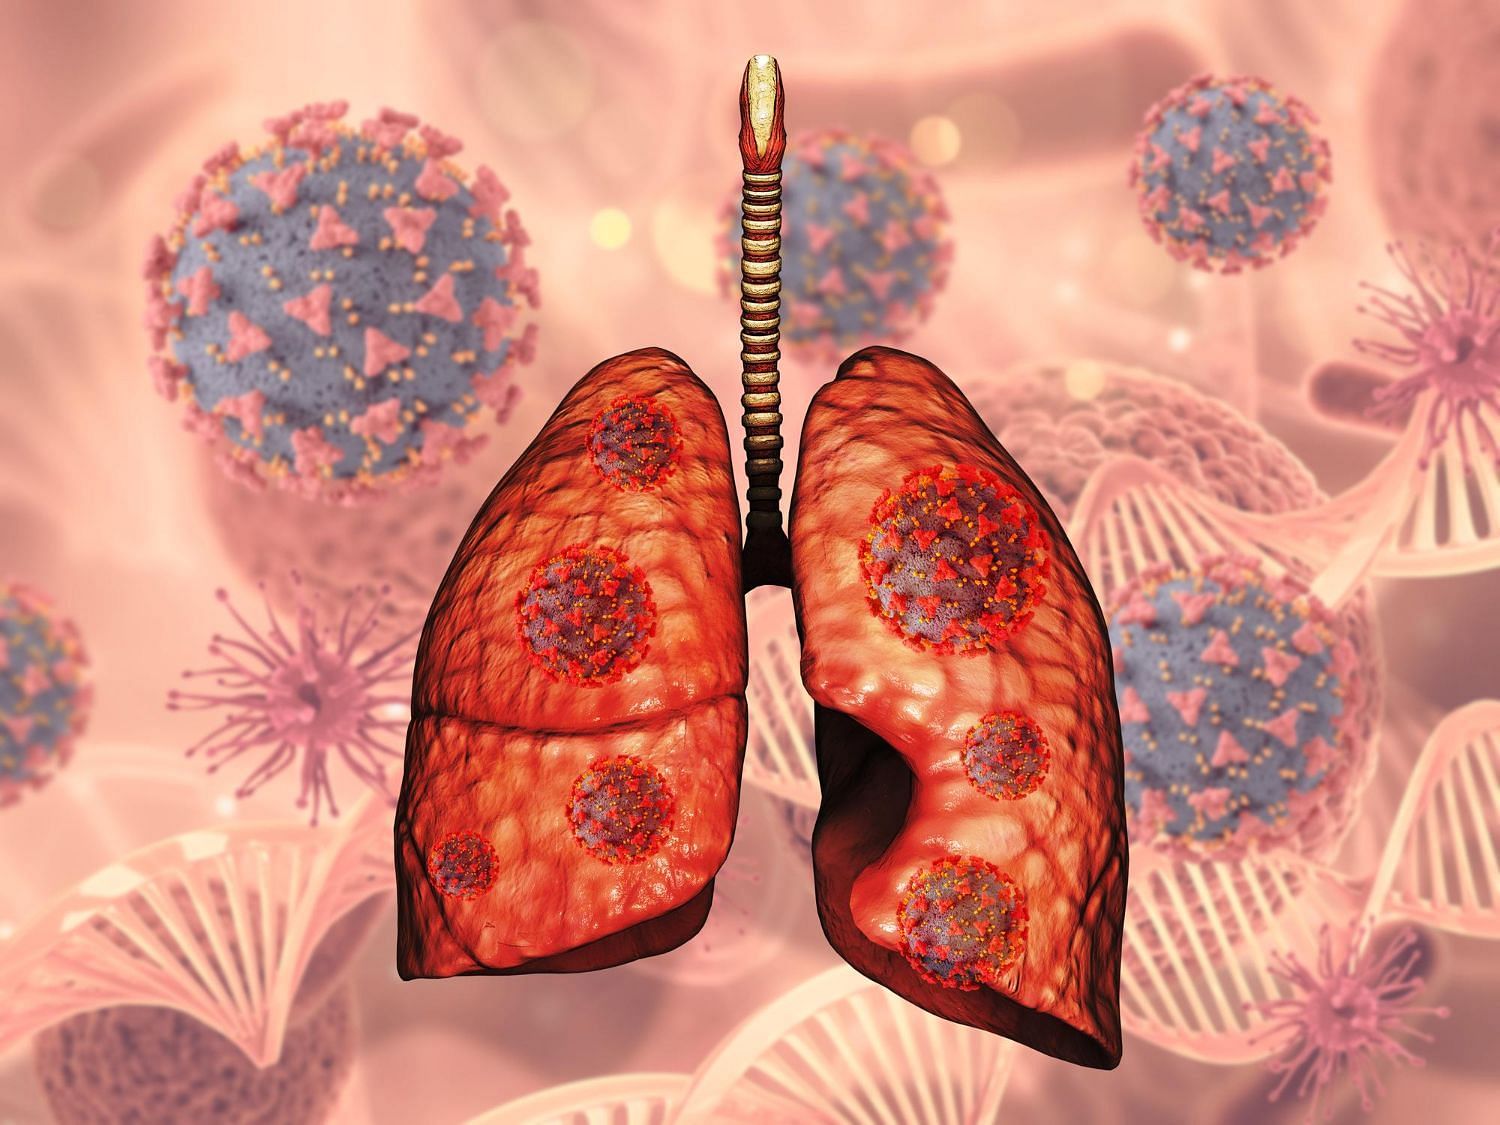 Infected or damaged lungs can cause chest pain when breathing (Image by kjpargeter on Freepik)